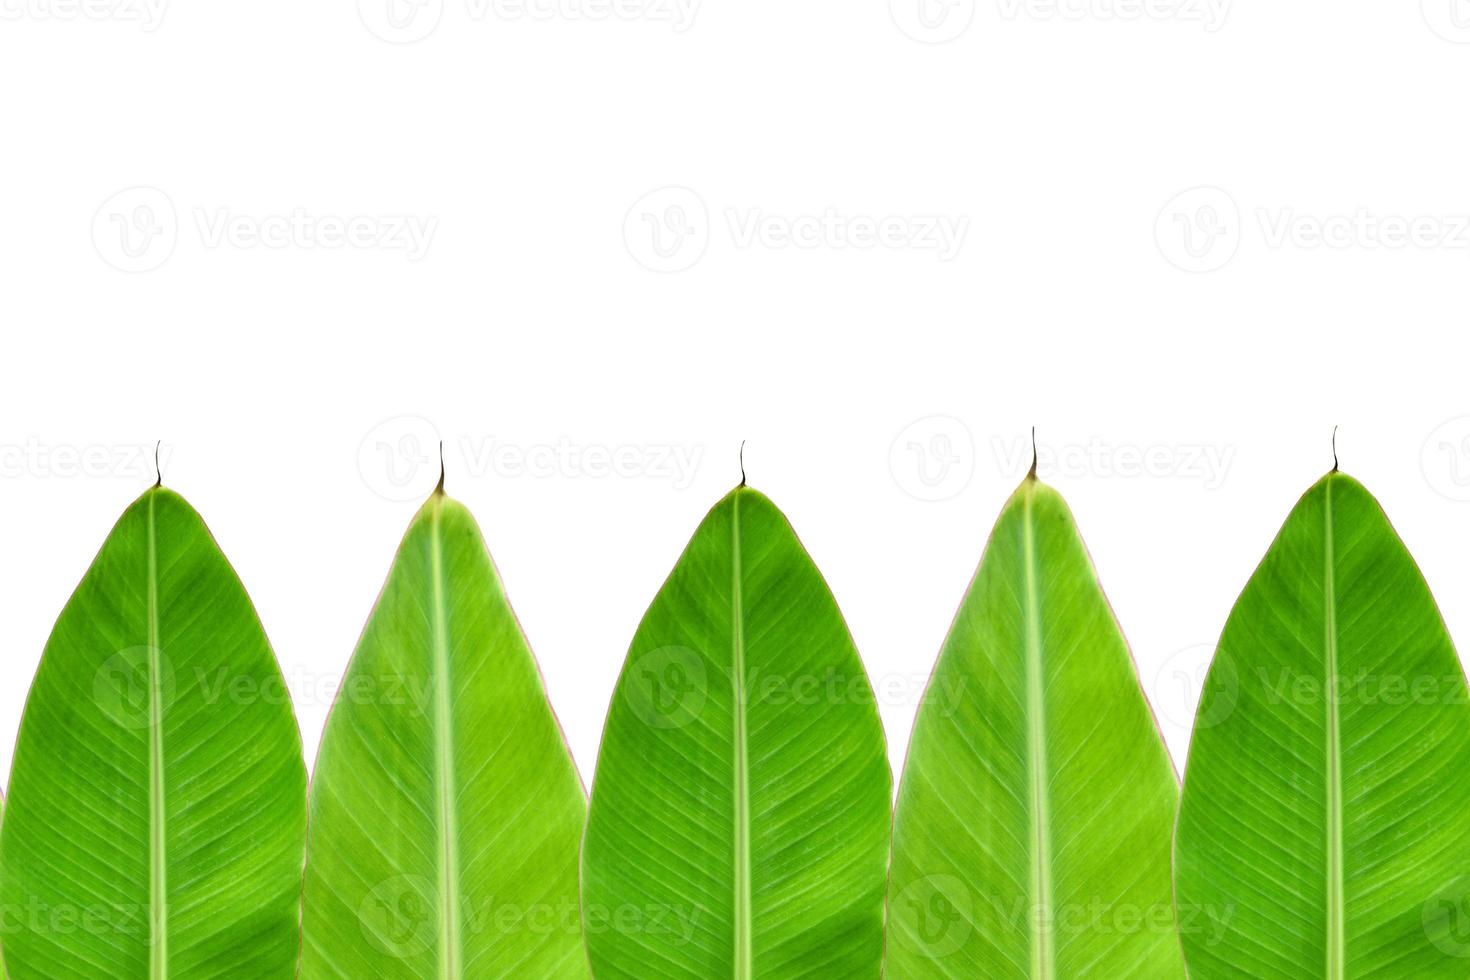 banana leaves on a white background photo